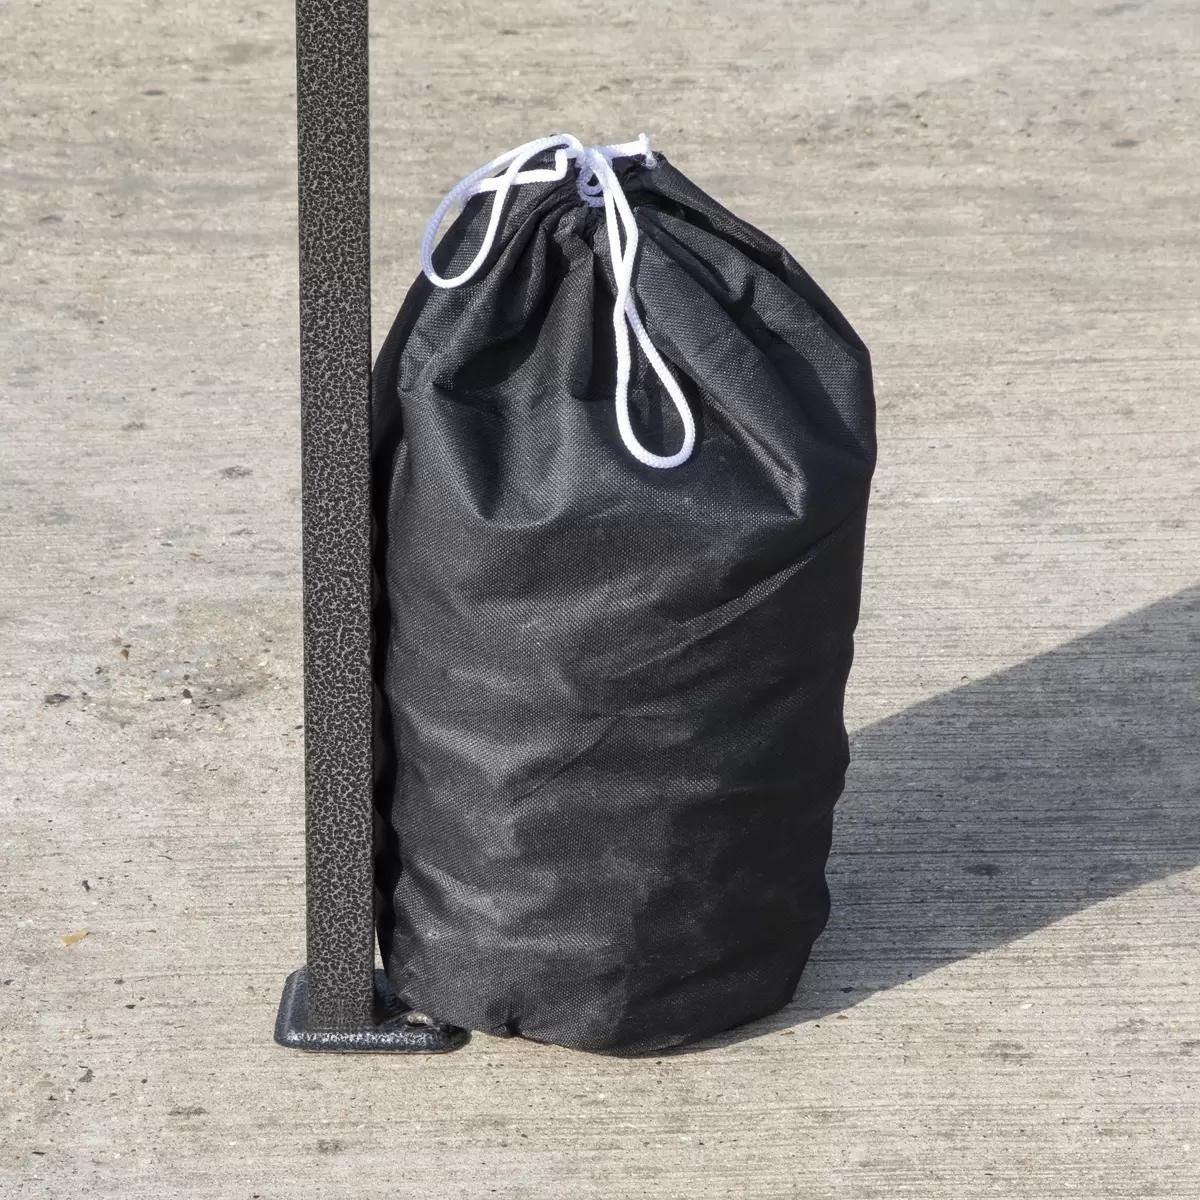 Dellonda DG128 Premium Pop-Up Gazebo Water Resistant Carry Bag Stakes Weight 2x2m